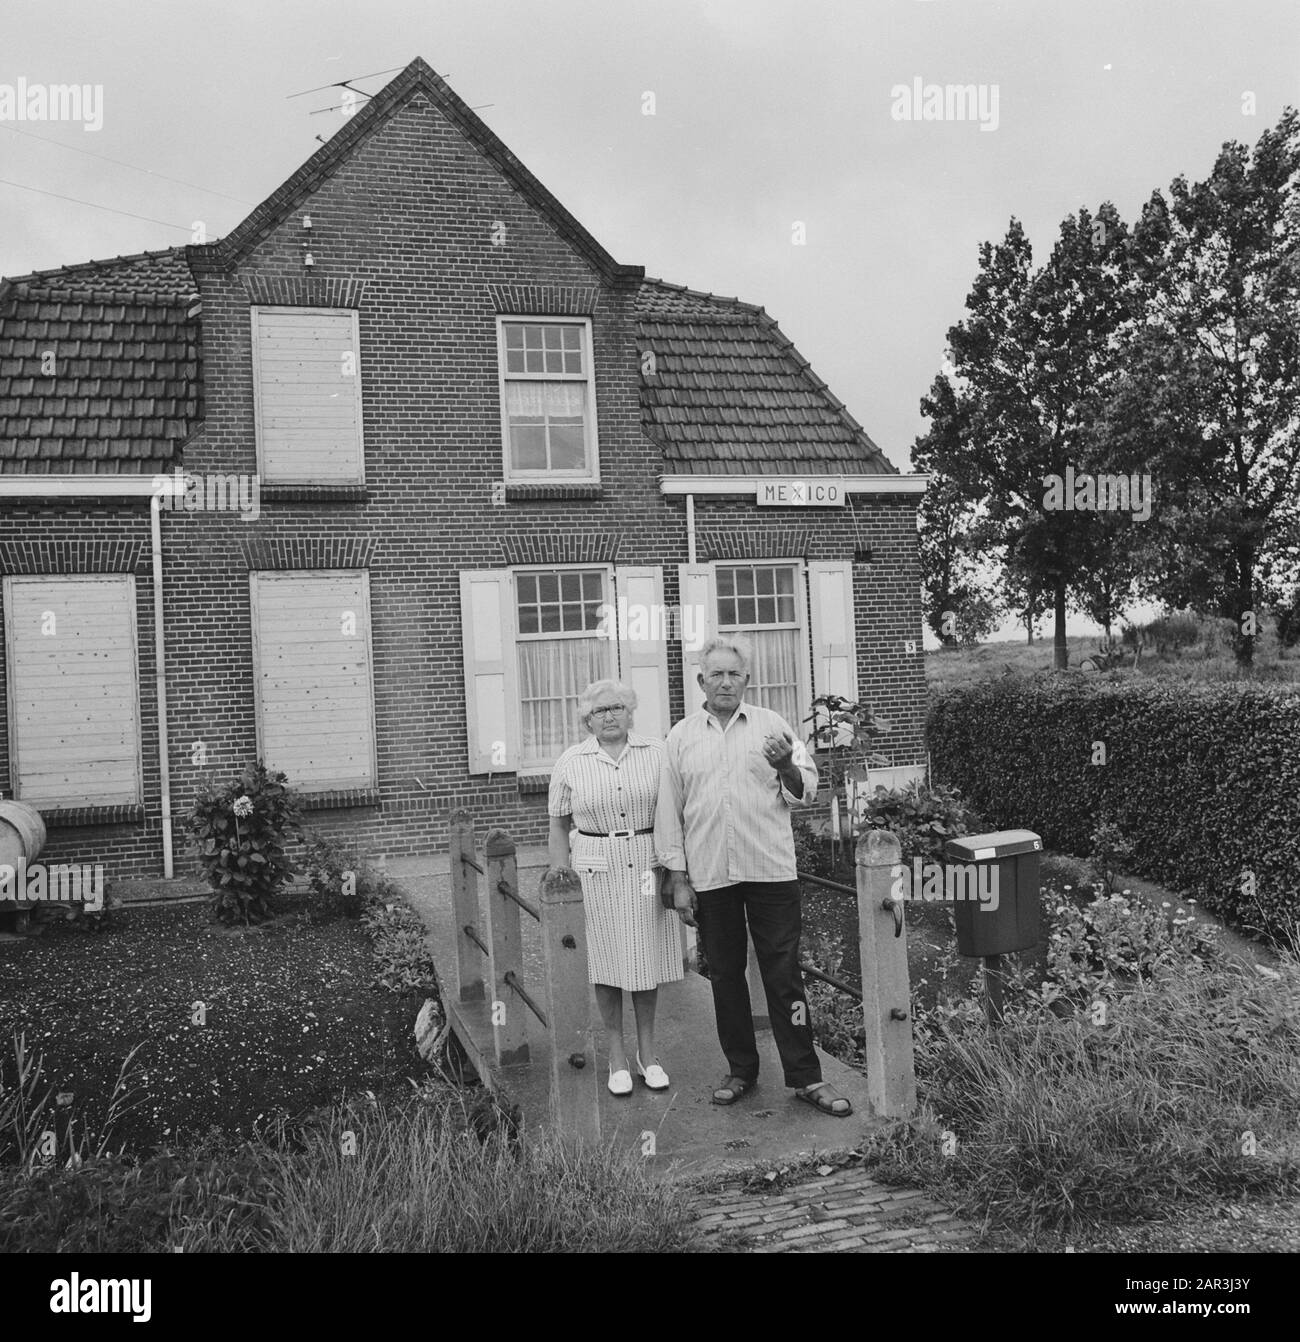 Assignment Reformed Netherlands in Ruygoord Date: 25 July 1973 Location: Amsterdam, Noord-Holland, Ruigoord Keywords: villages Stock Photo